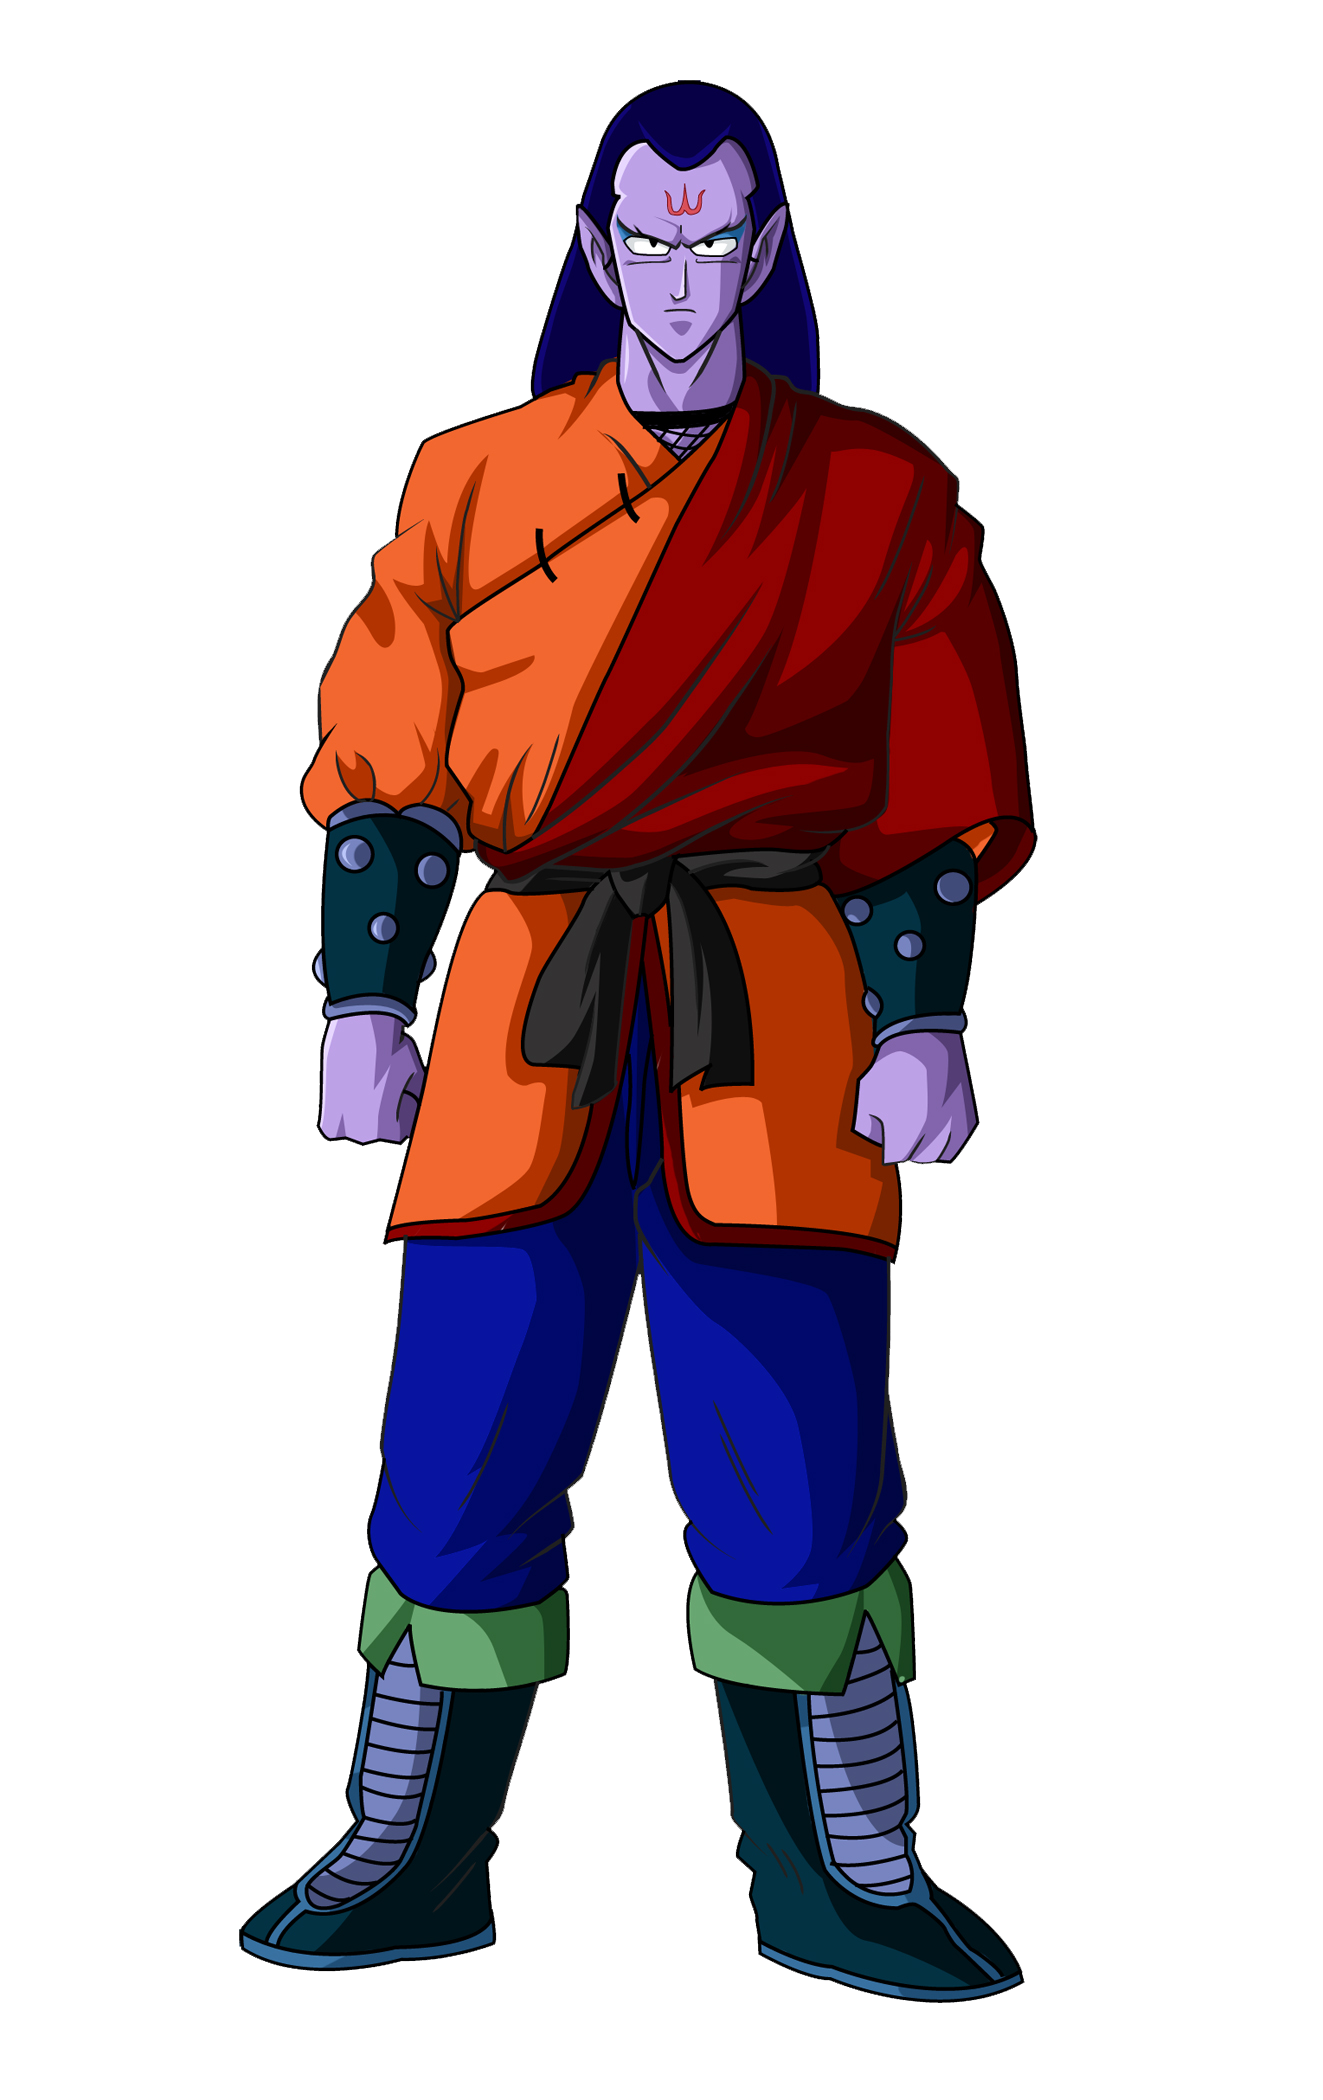 Dragon ball z character creator online game